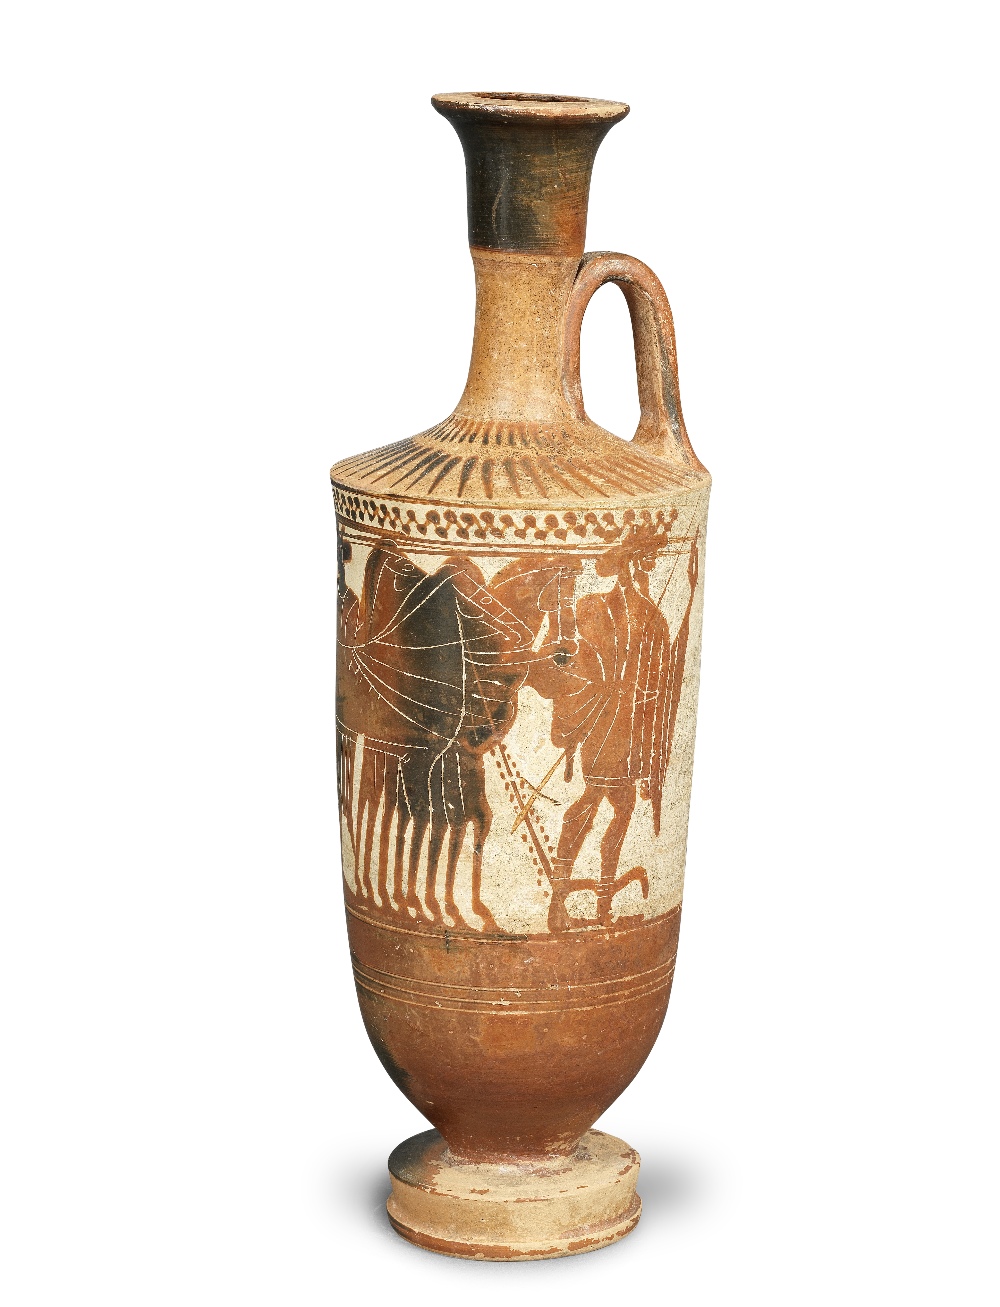 An Attic black-figure white-ground chimney lekythos with a chariot scene